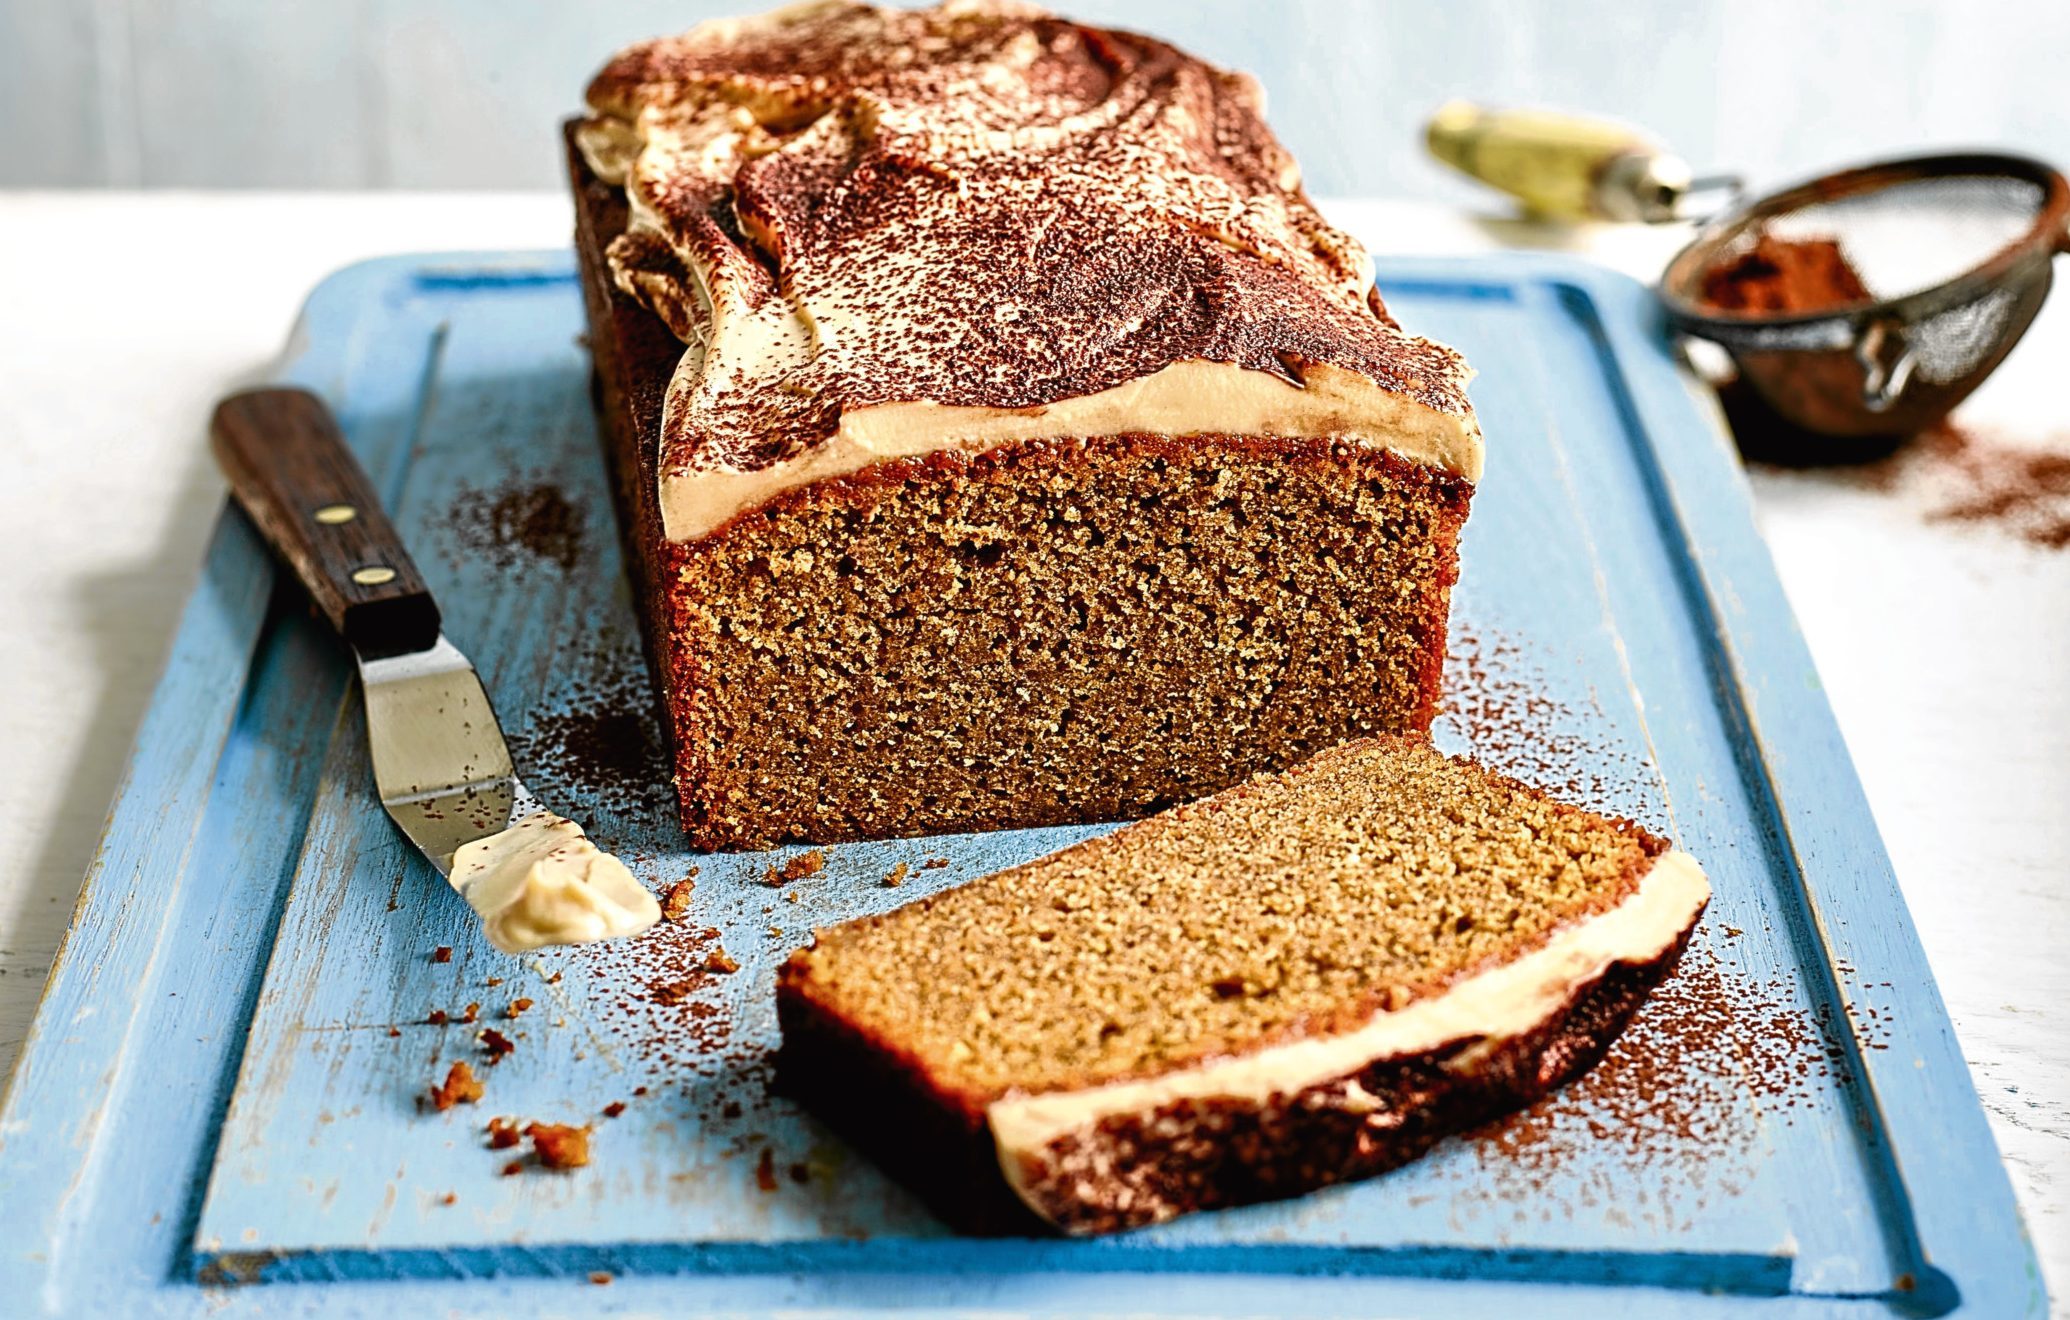 Cappuccino loaf cake from Waitrose